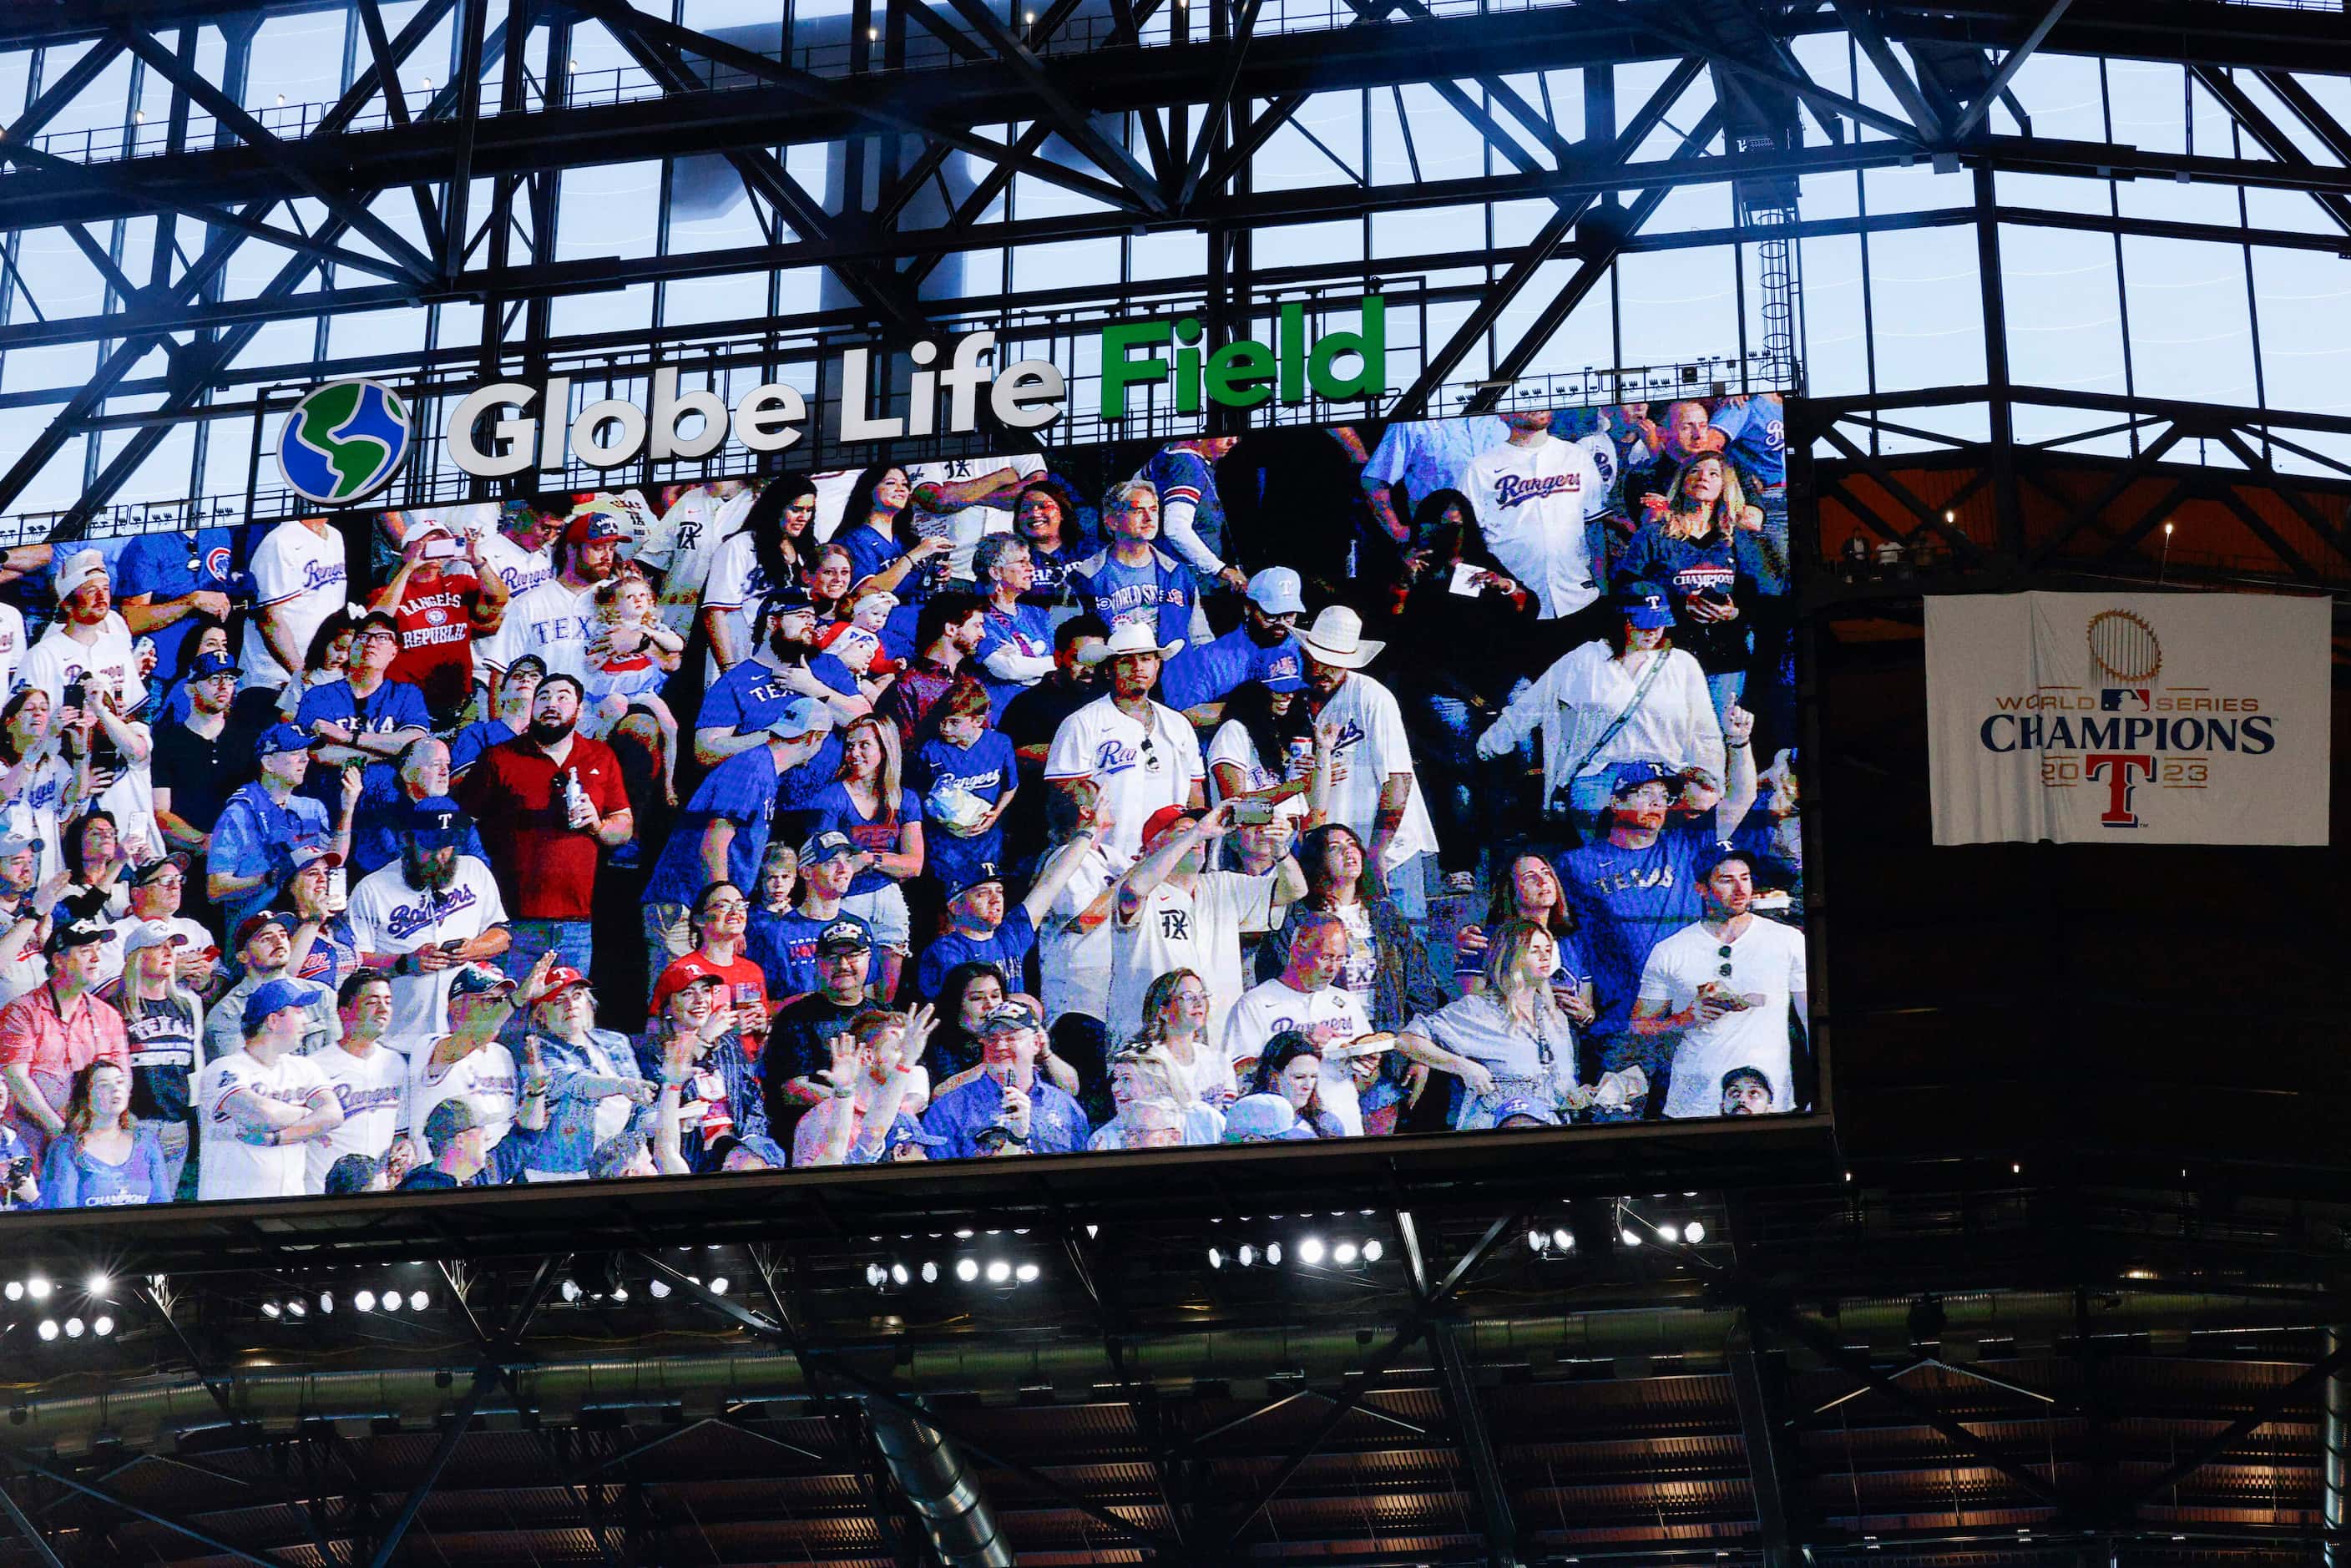 Fans are shown on the video board after the Texas Rangers World Series champions banner was...